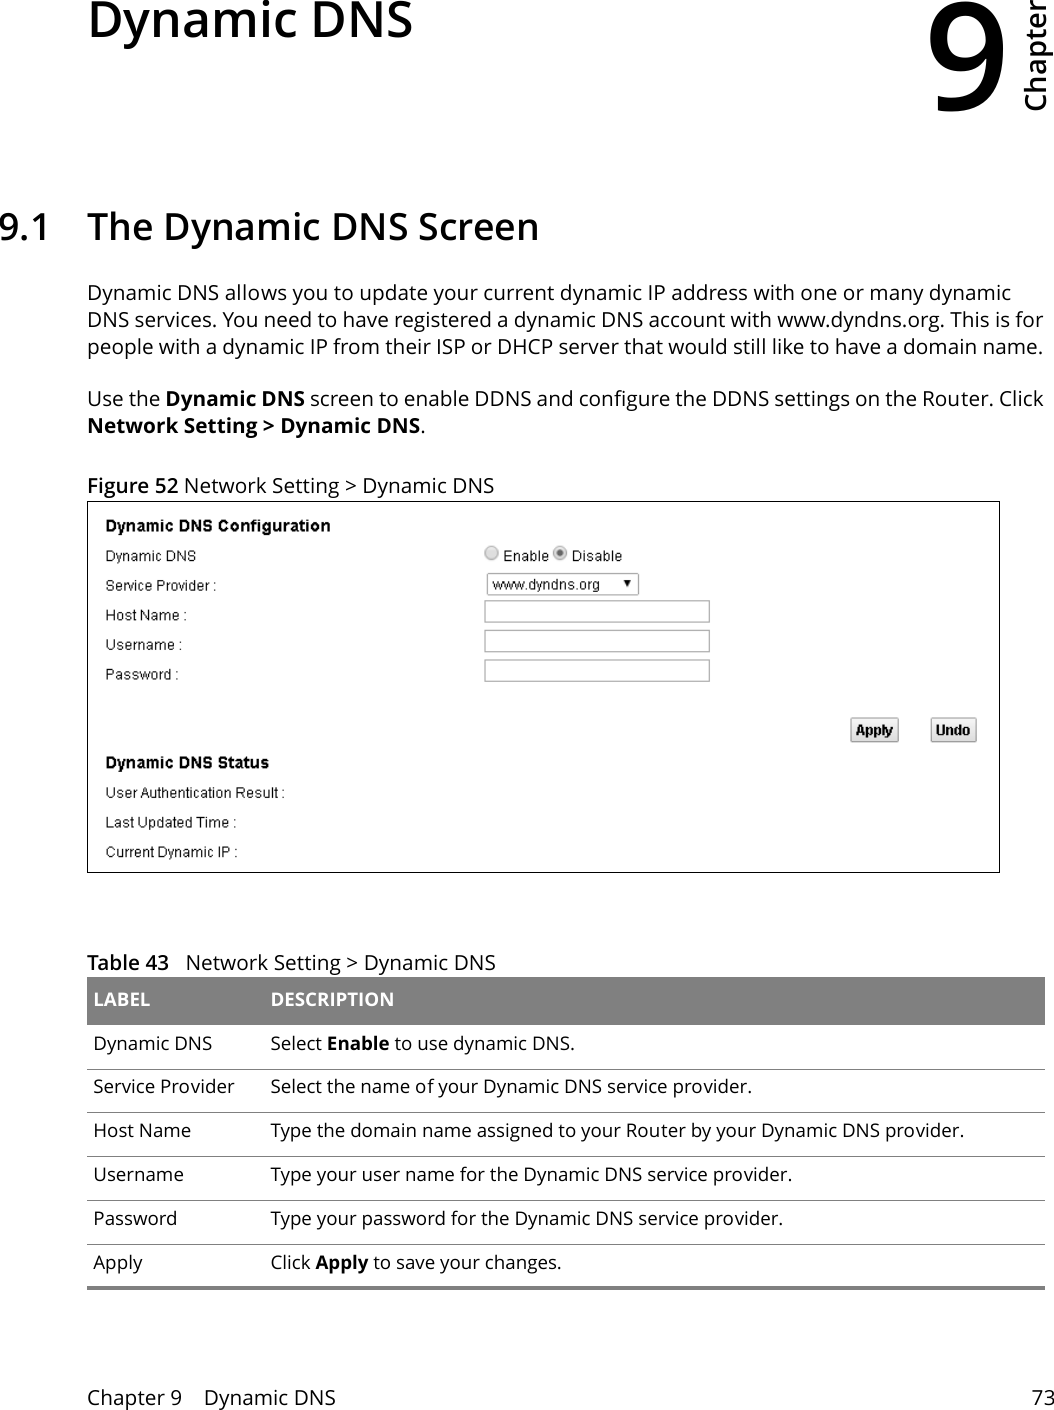 9Chapter Chapter 9    Dynamic DNS 73CHAPTER 9 Chapter 9 Dynamic DNS9.1  The Dynamic DNS ScreenDynamic DNS allows you to update your current dynamic IP address with one or many dynamic DNS services. You need to have registered a dynamic DNS account with www.dyndns.org. This is for people with a dynamic IP from their ISP or DHCP server that would still like to have a domain name. Use the Dynamic DNS screen to enable DDNS and configure the DDNS settings on the Router. Click Network Setting &gt; Dynamic DNS. Figure 52 Network Setting &gt; Dynamic DNS Table 43   Network Setting &gt; Dynamic DNS LABEL DESCRIPTIONDynamic DNS Select Enable to use dynamic DNS.Service Provider Select the name of your Dynamic DNS service provider.Host Name Type the domain name assigned to your Router by your Dynamic DNS provider.Username Type your user name for the Dynamic DNS service provider.Password Type your password for the Dynamic DNS service provider.Apply Click Apply to save your changes.